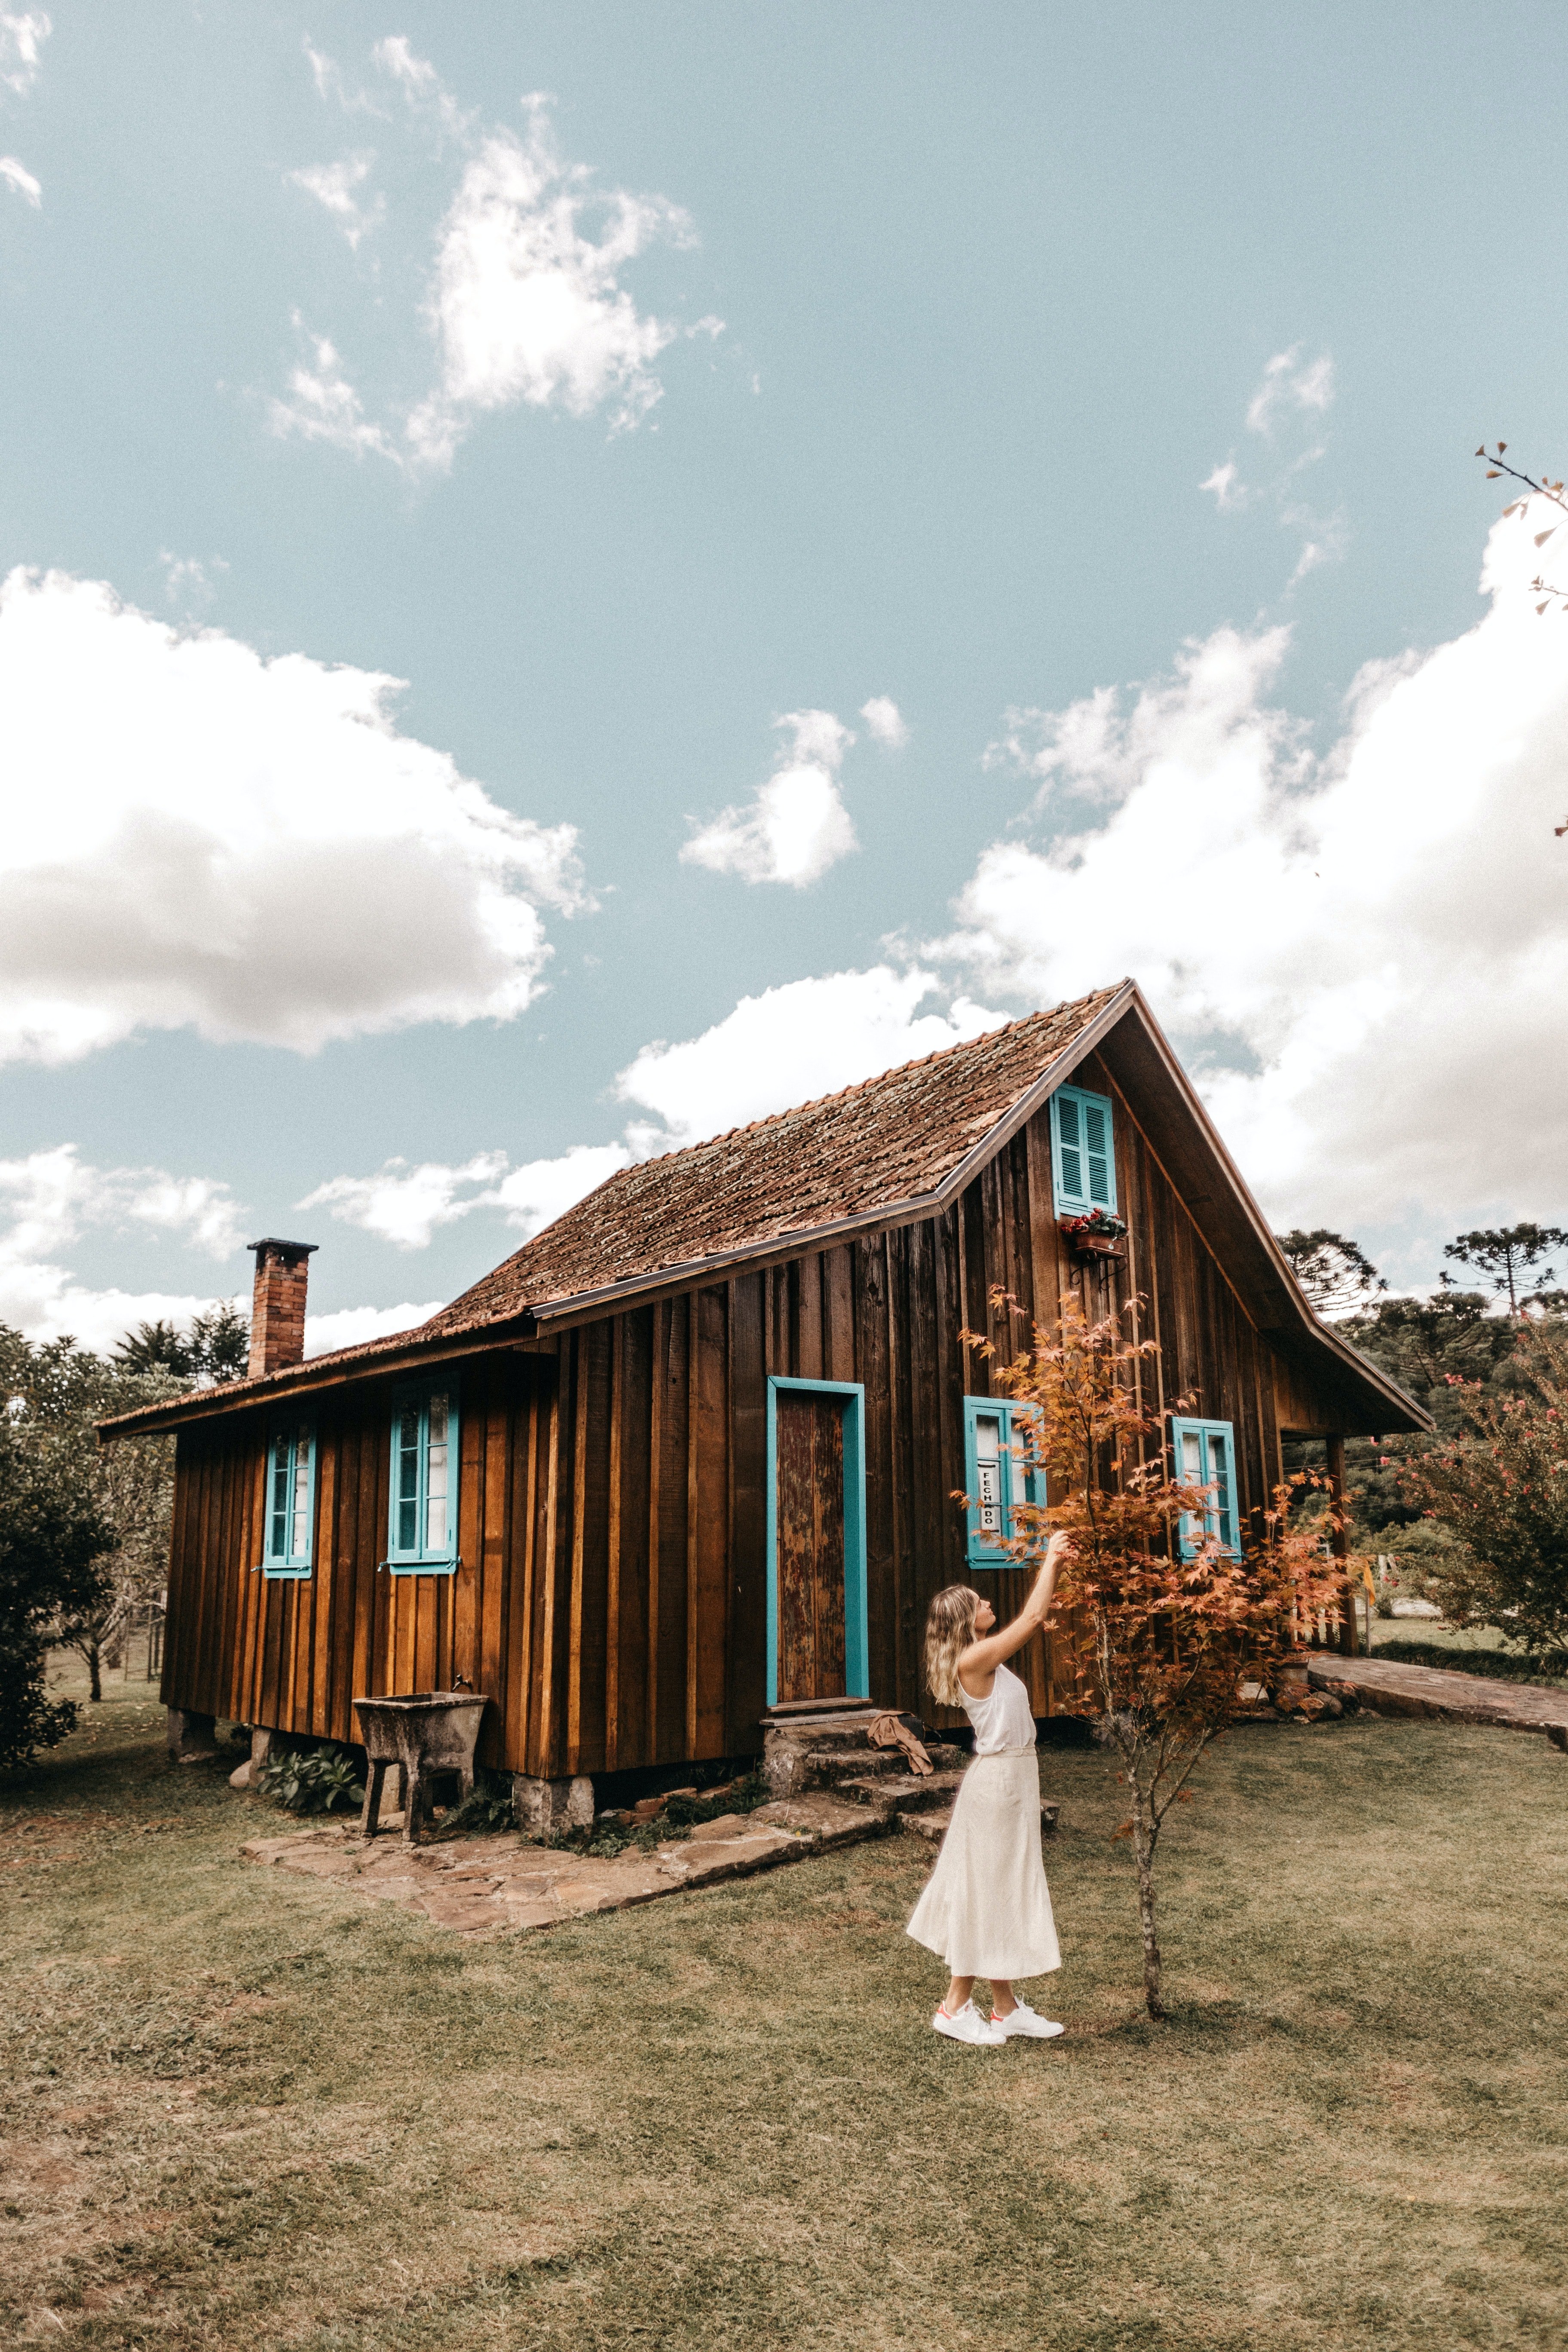 Catherine decided to live in Emily's old house. | Source: Unsplash